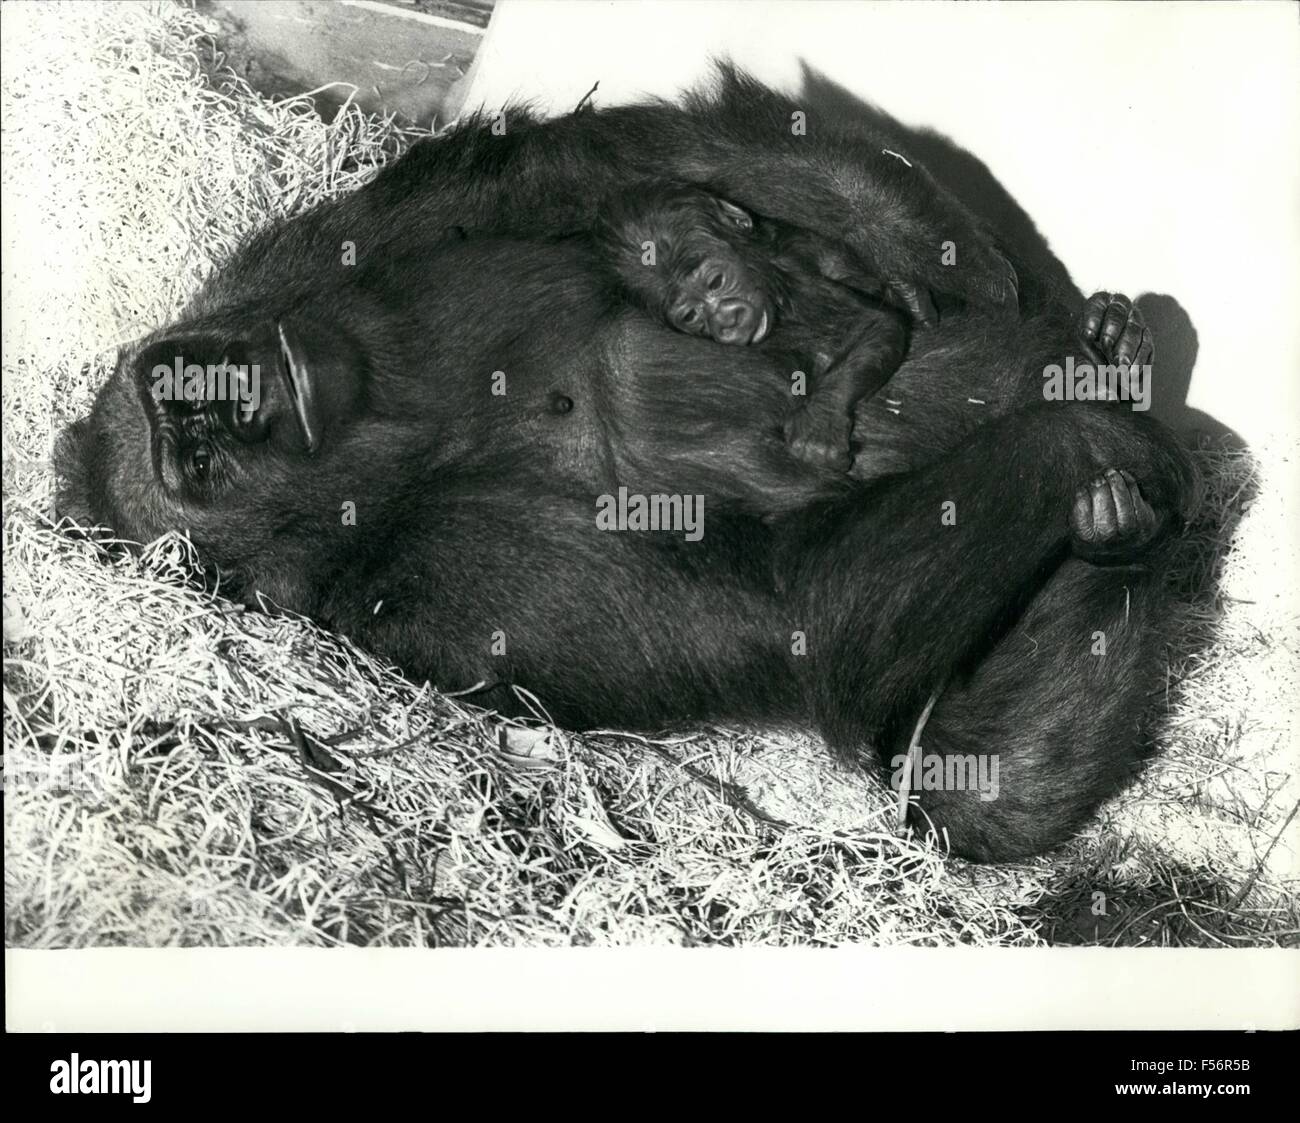 1974 - The rising Gorilla population of Jersey. A New Jersey born Gorilla baby.: The last 2 years has seen the birth of 3 gorilla babies in New Jersey zoo. The latest addition to the family came this October ''Zaire'' a female baby, of father 'Jambo' from Basle zoo. Switzerland, and mother, Nandi resident of Jersey zoo. Father Jambo has sired all three Jersey babie he was invited to Jersey especially for this purpose. His harem consists of N' Pongo and Nandi. n' Pongo has produce male baby Mamfe, and Nandi gave birth to the first baby, another male, Assumbo, in July '73, so Zaire is her second Stock Photo